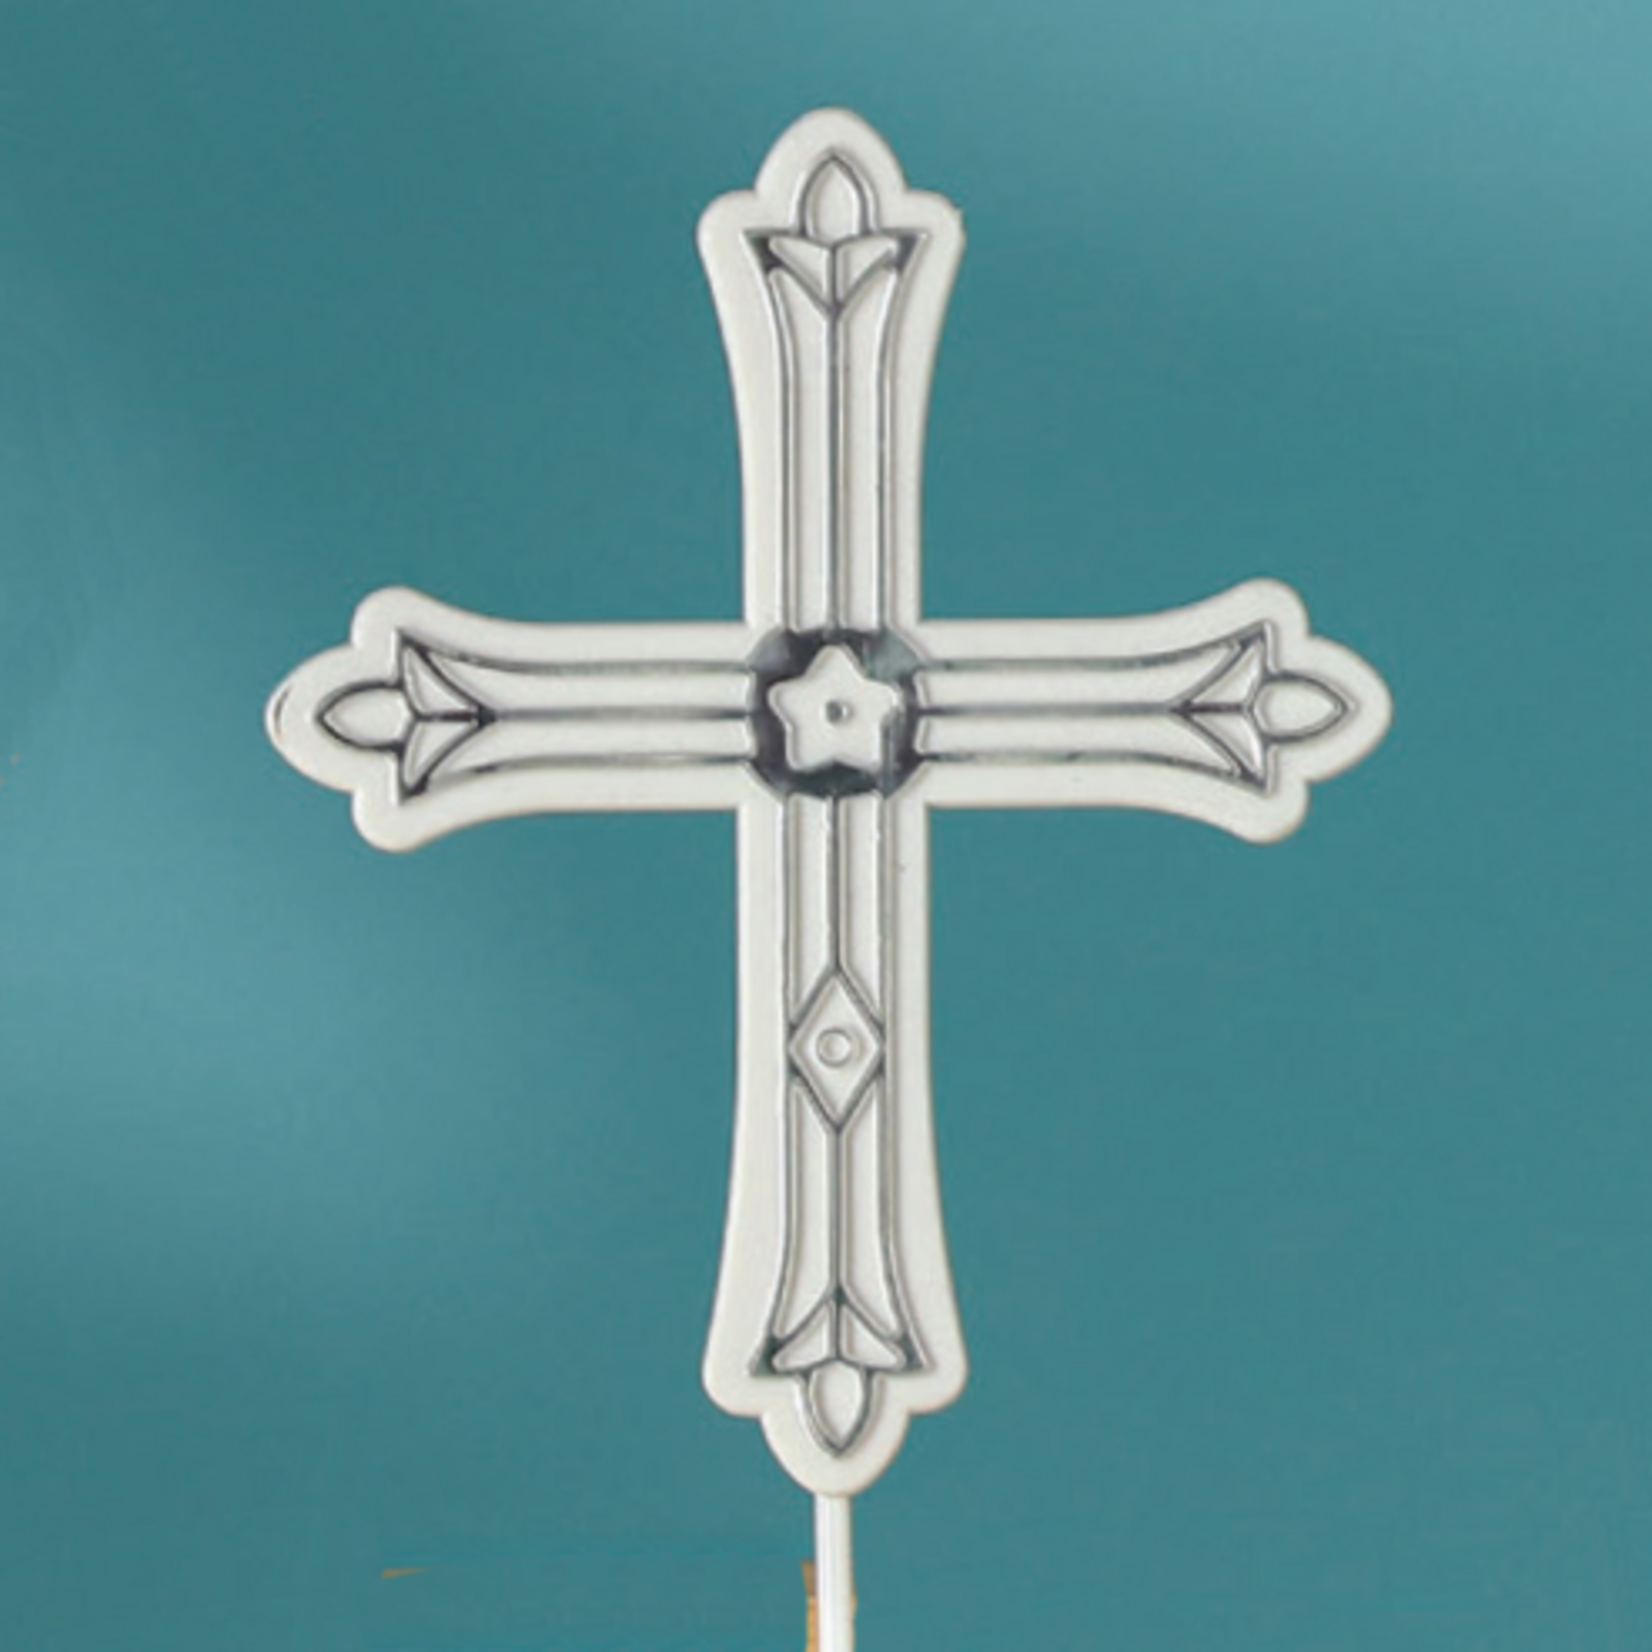 4” X 5” SILVER CROSS PICK, SILVER ON WHITE WITH WHITE STICK